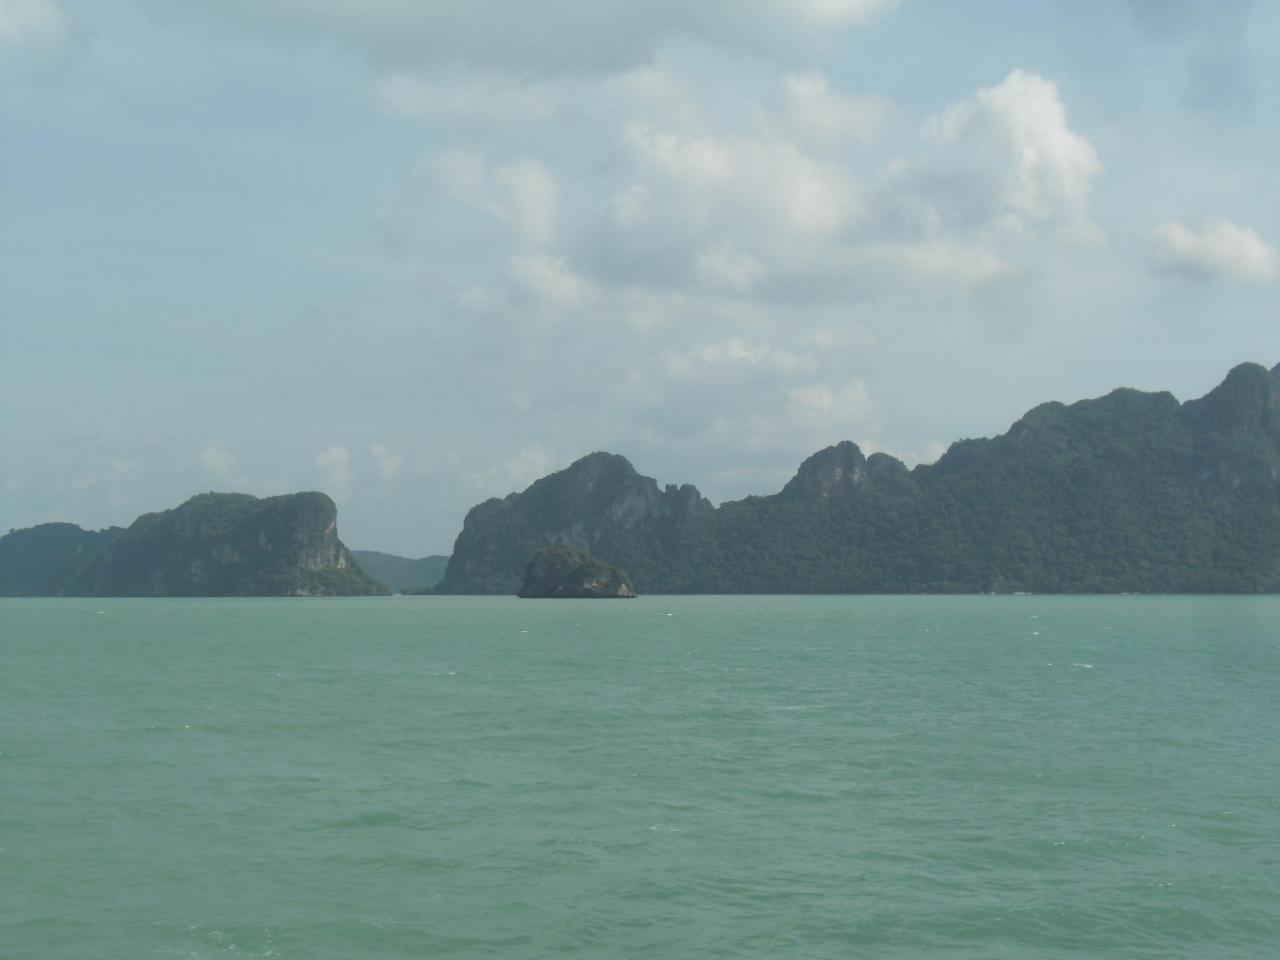 Another view of Gulf of Thailand on way to Koh Phangan